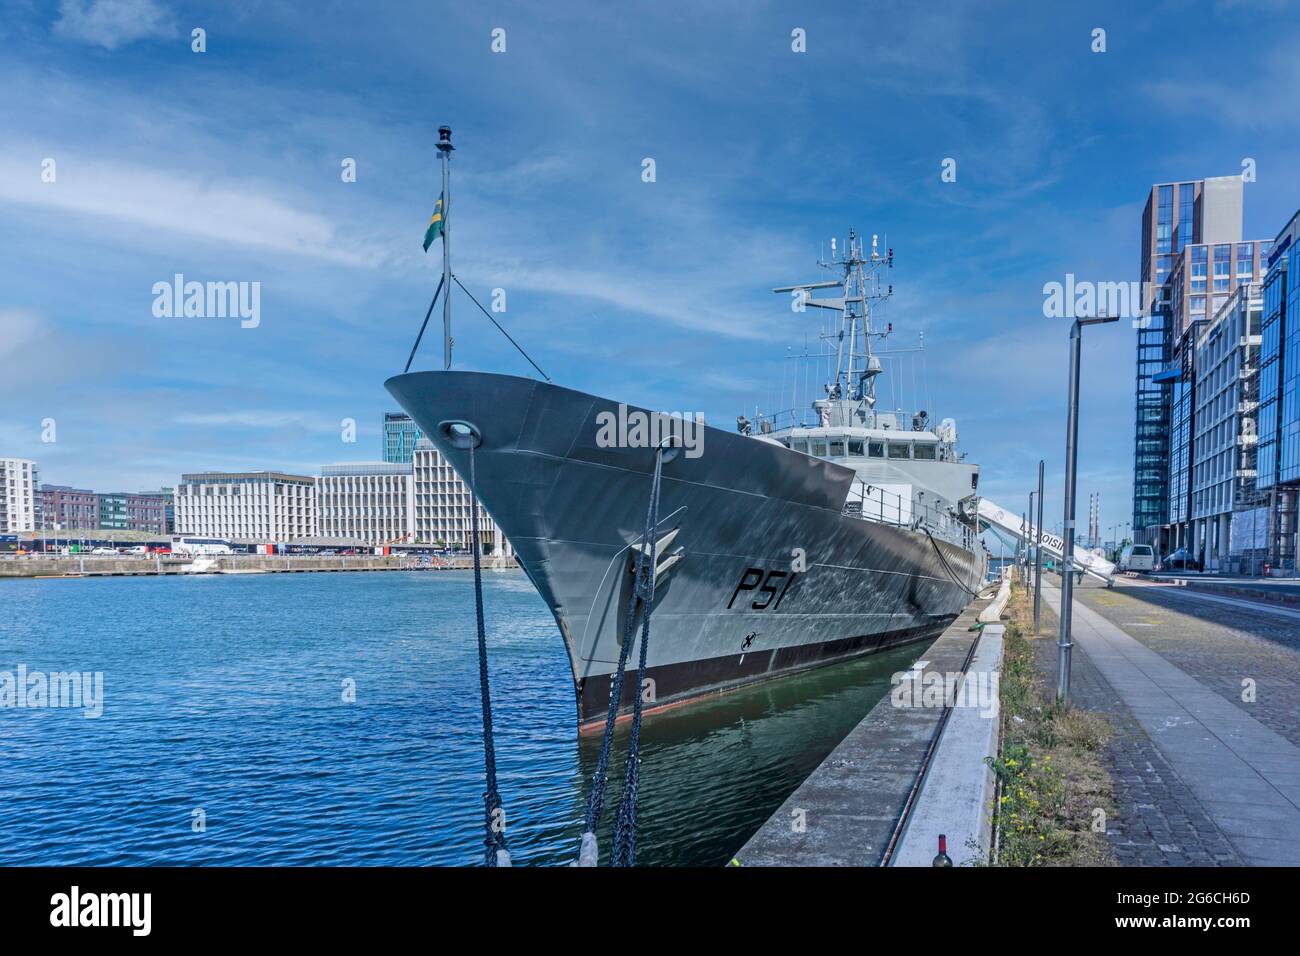 The Irish Naval vessel the L. E. Roisin berthed here in Sir John Rogersons Quay in Dublin. It is involved in fishery protection and search & rescue. Stock Photo